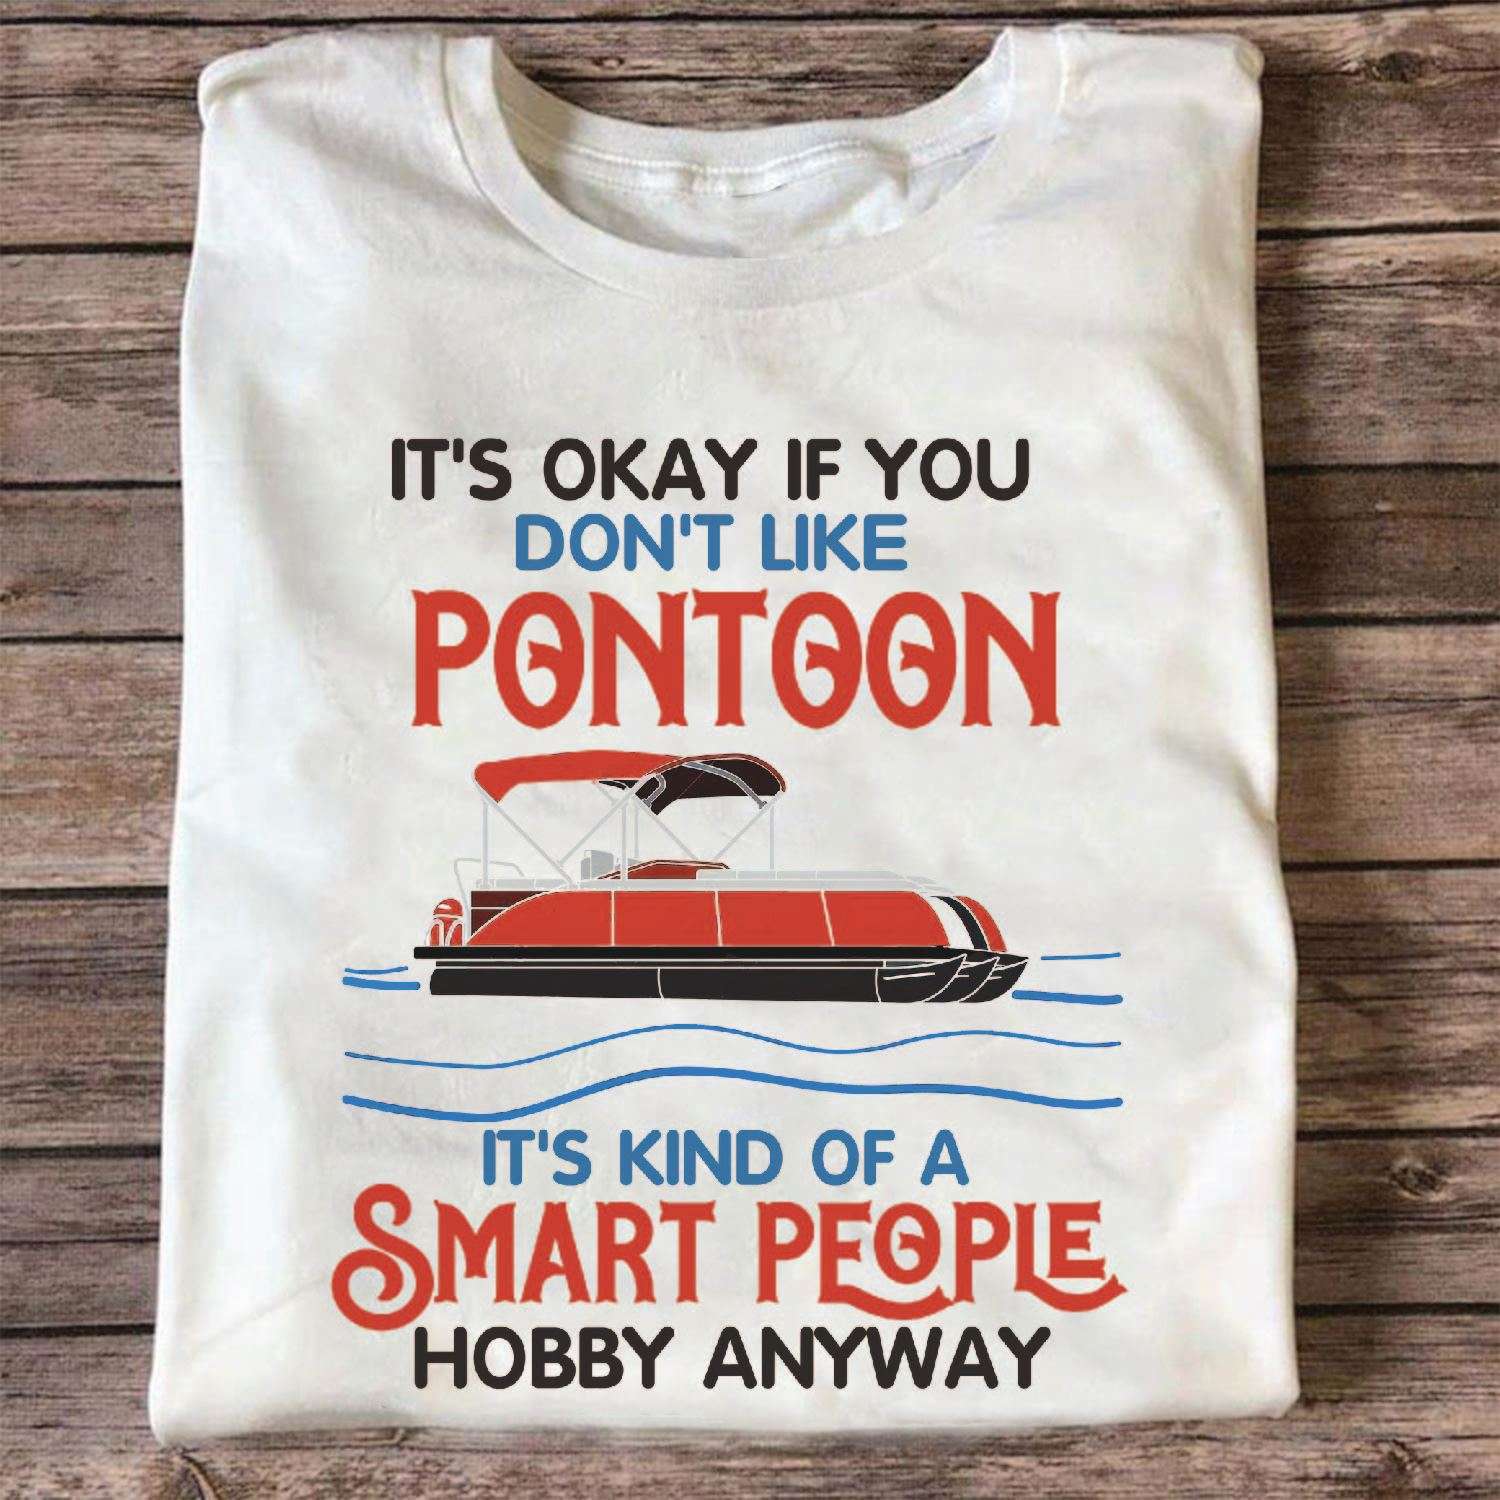 It's okay if you don't like Pontoon It's kind of a smart people hobby anyway